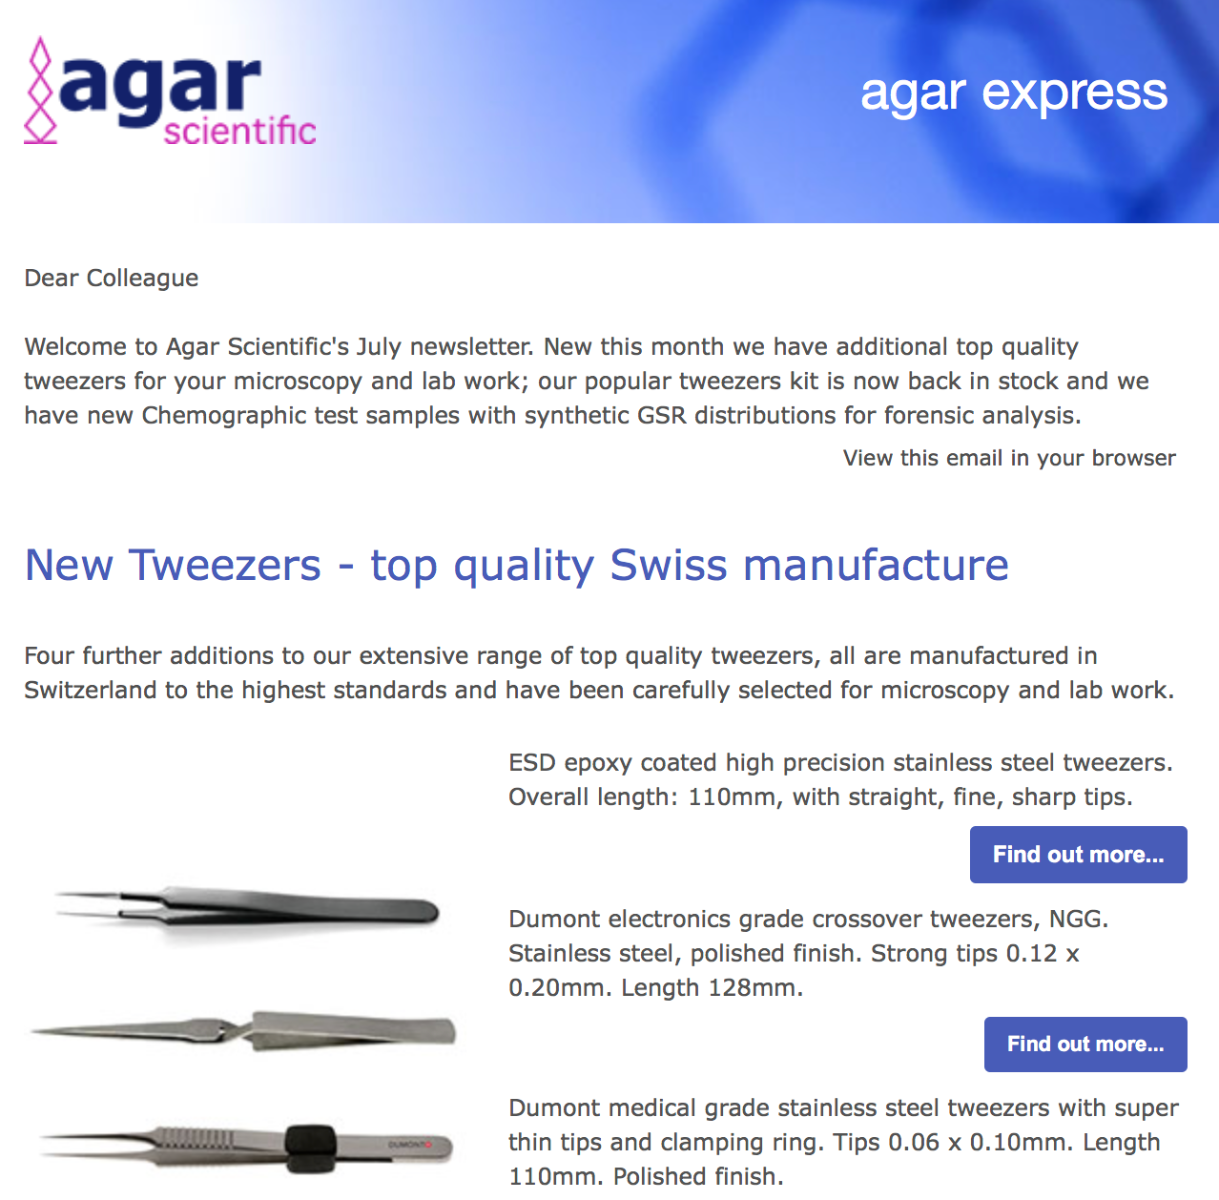 Agar Express July 2018 - new top quality tweezers for microscopy and lab, Chemographic test samples for forensic analysis & more…